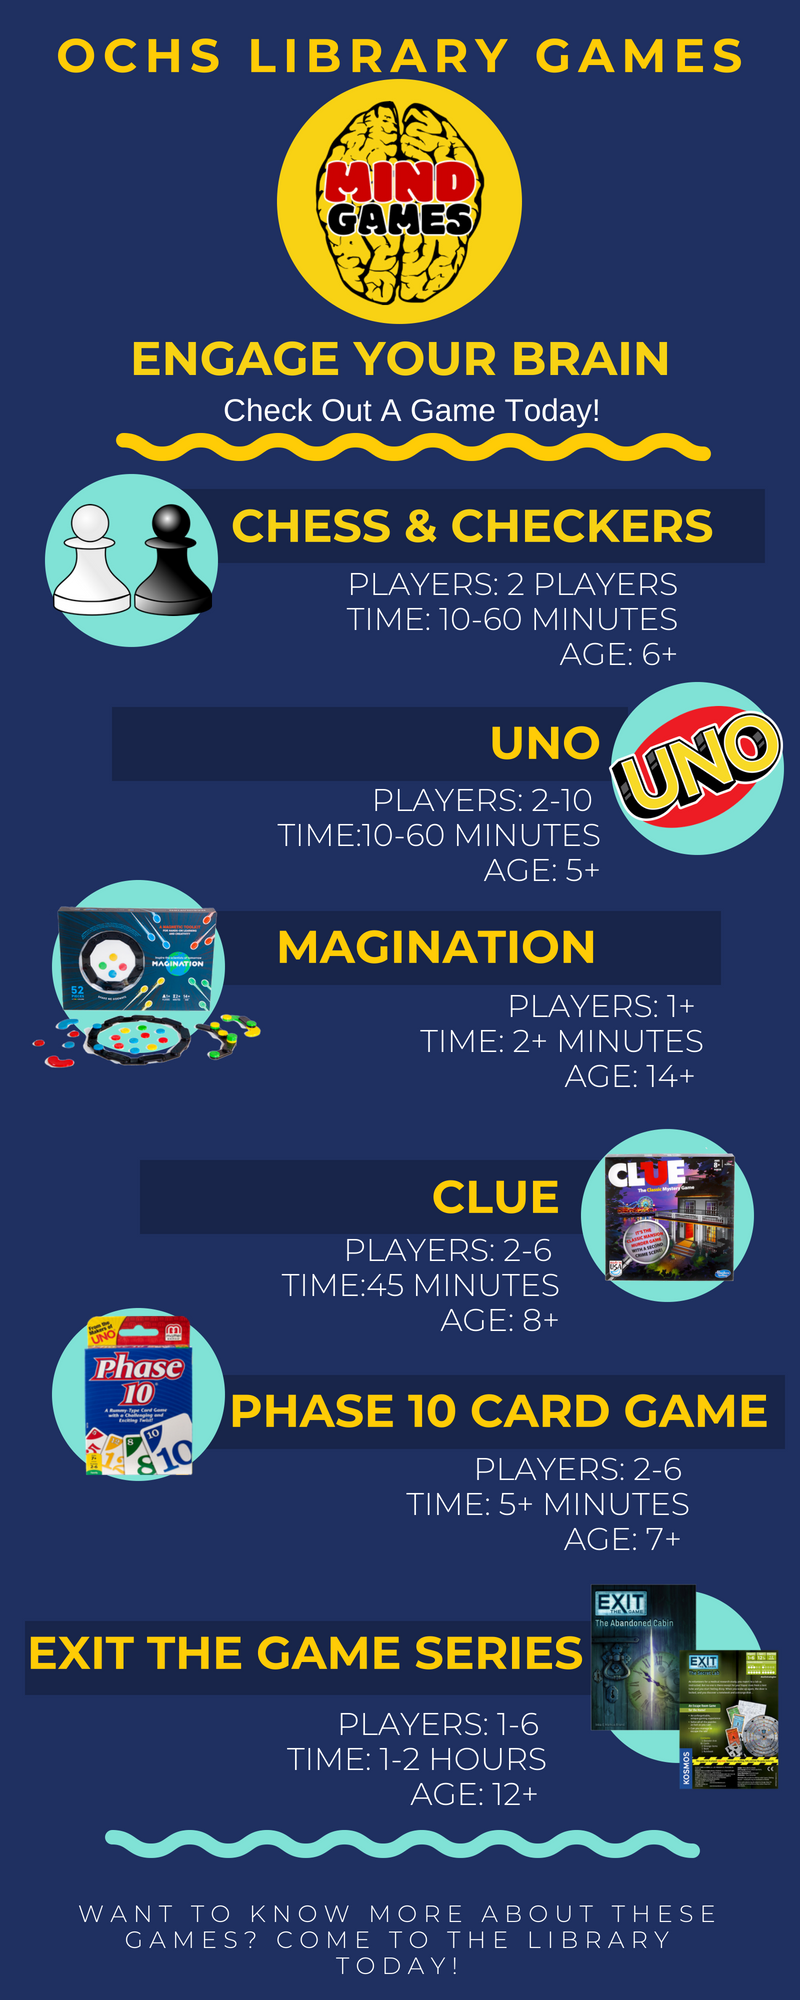 OCHS Library Games Infographic